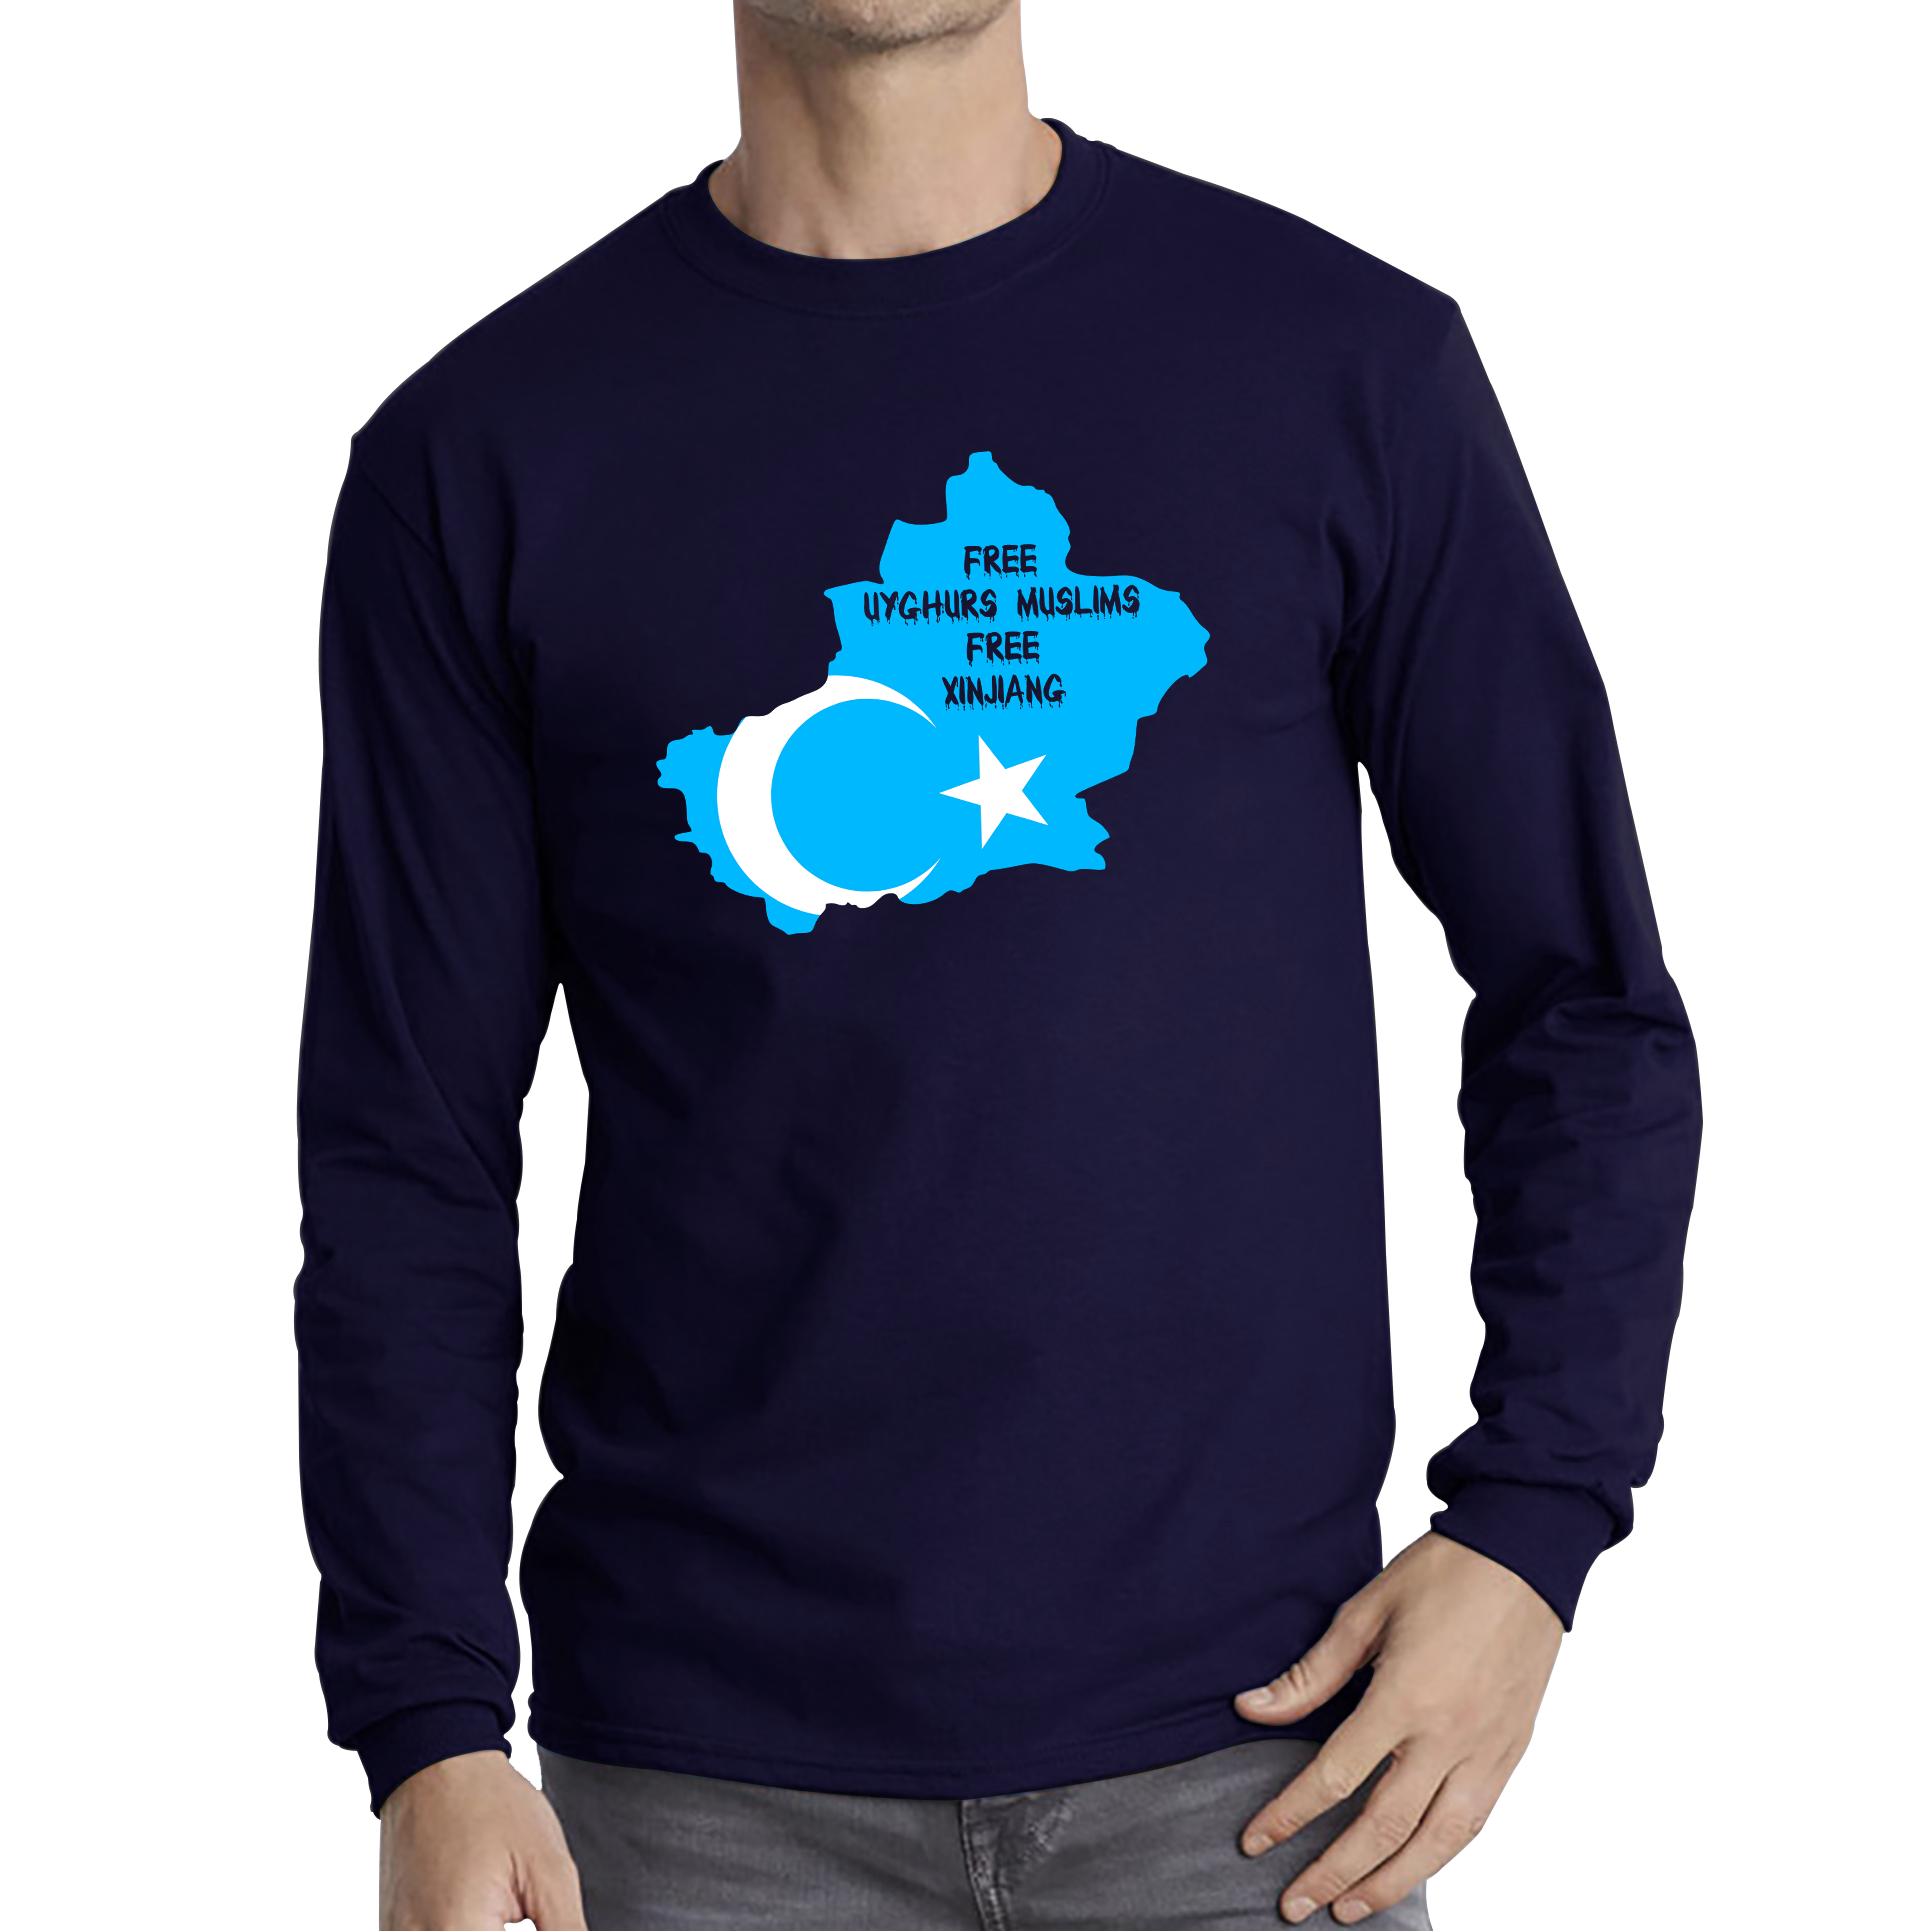 Free Uyghurs Muslims Free Xinjiang Freedom For Uygurs Uigurs East Turkestan Support And Freedom Long Sleeve T Shirt